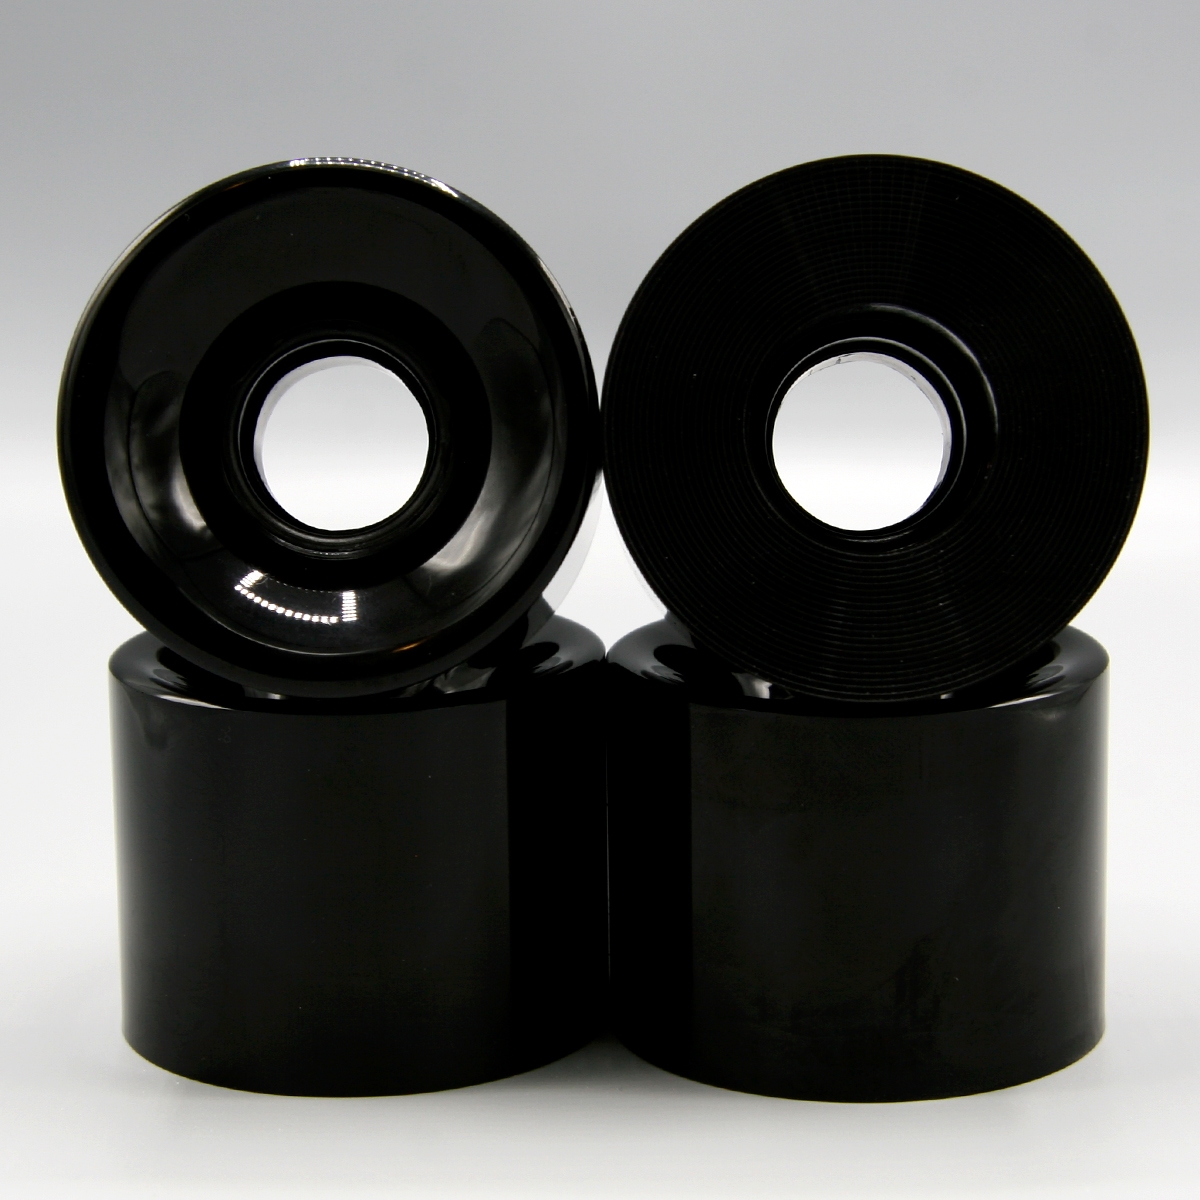 Blank 60mm (Solid Black) - Includes 1/4" Risers